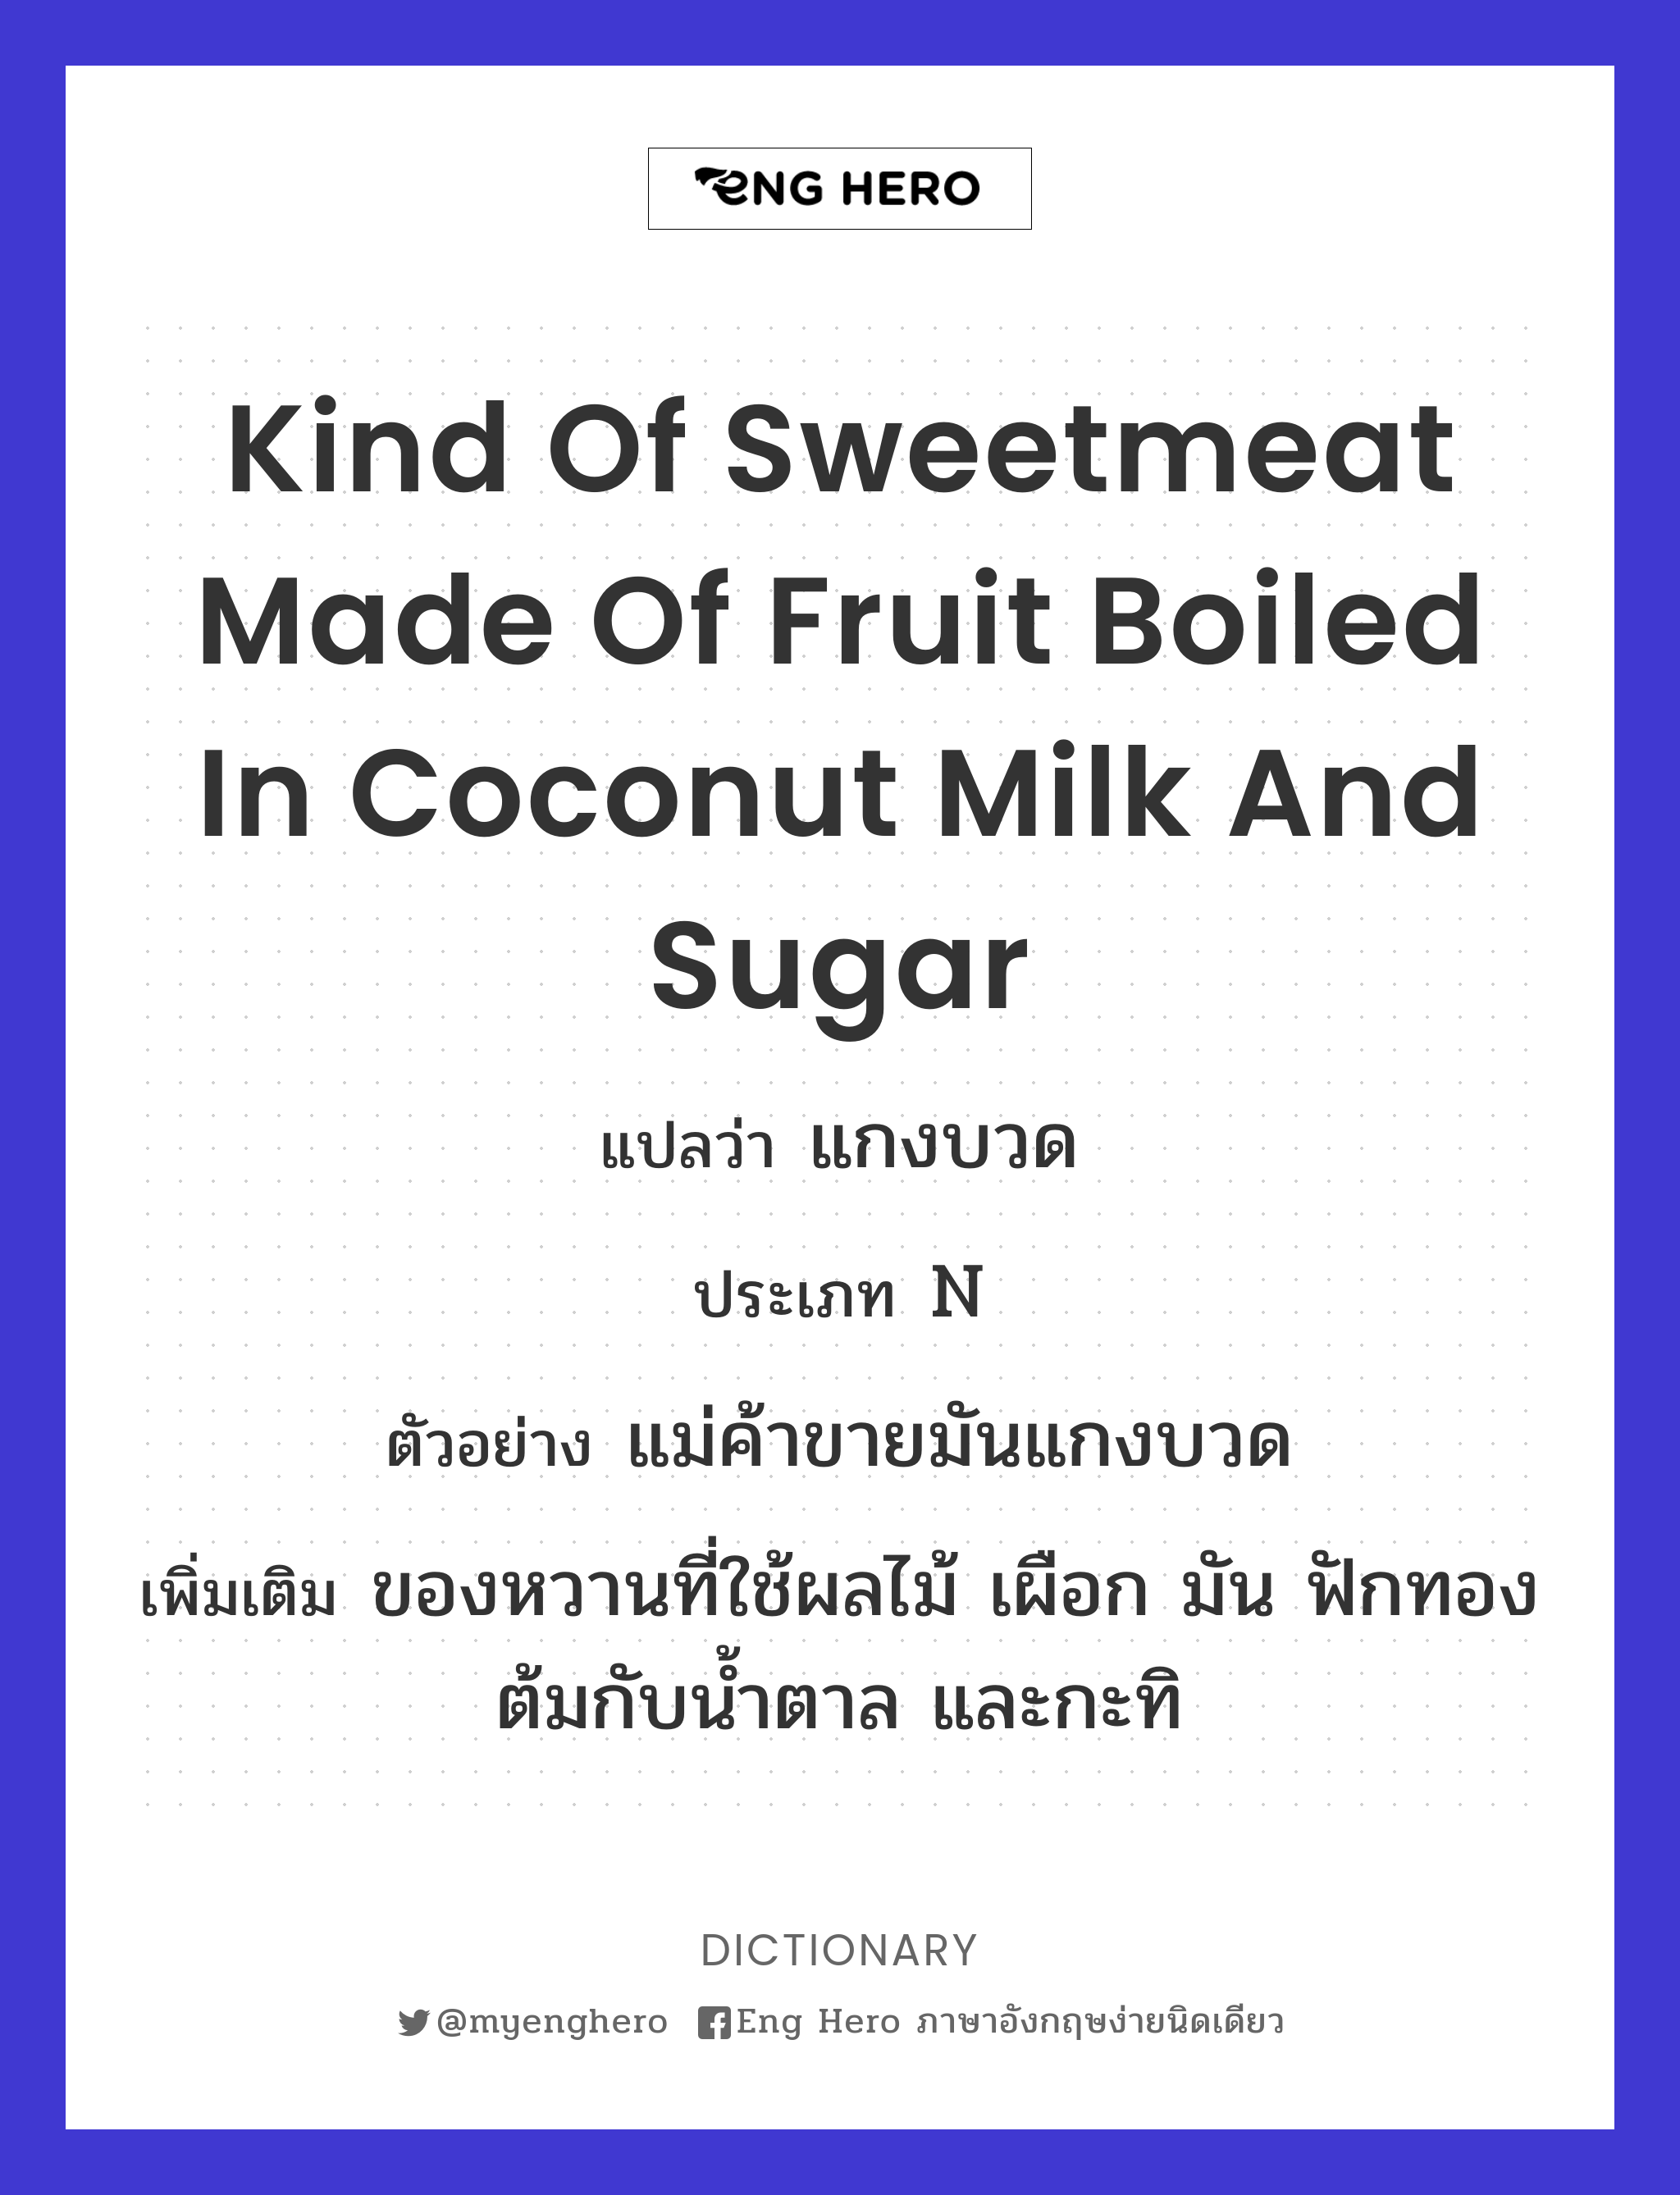 kind of sweetmeat made of fruit boiled in coconut milk and sugar